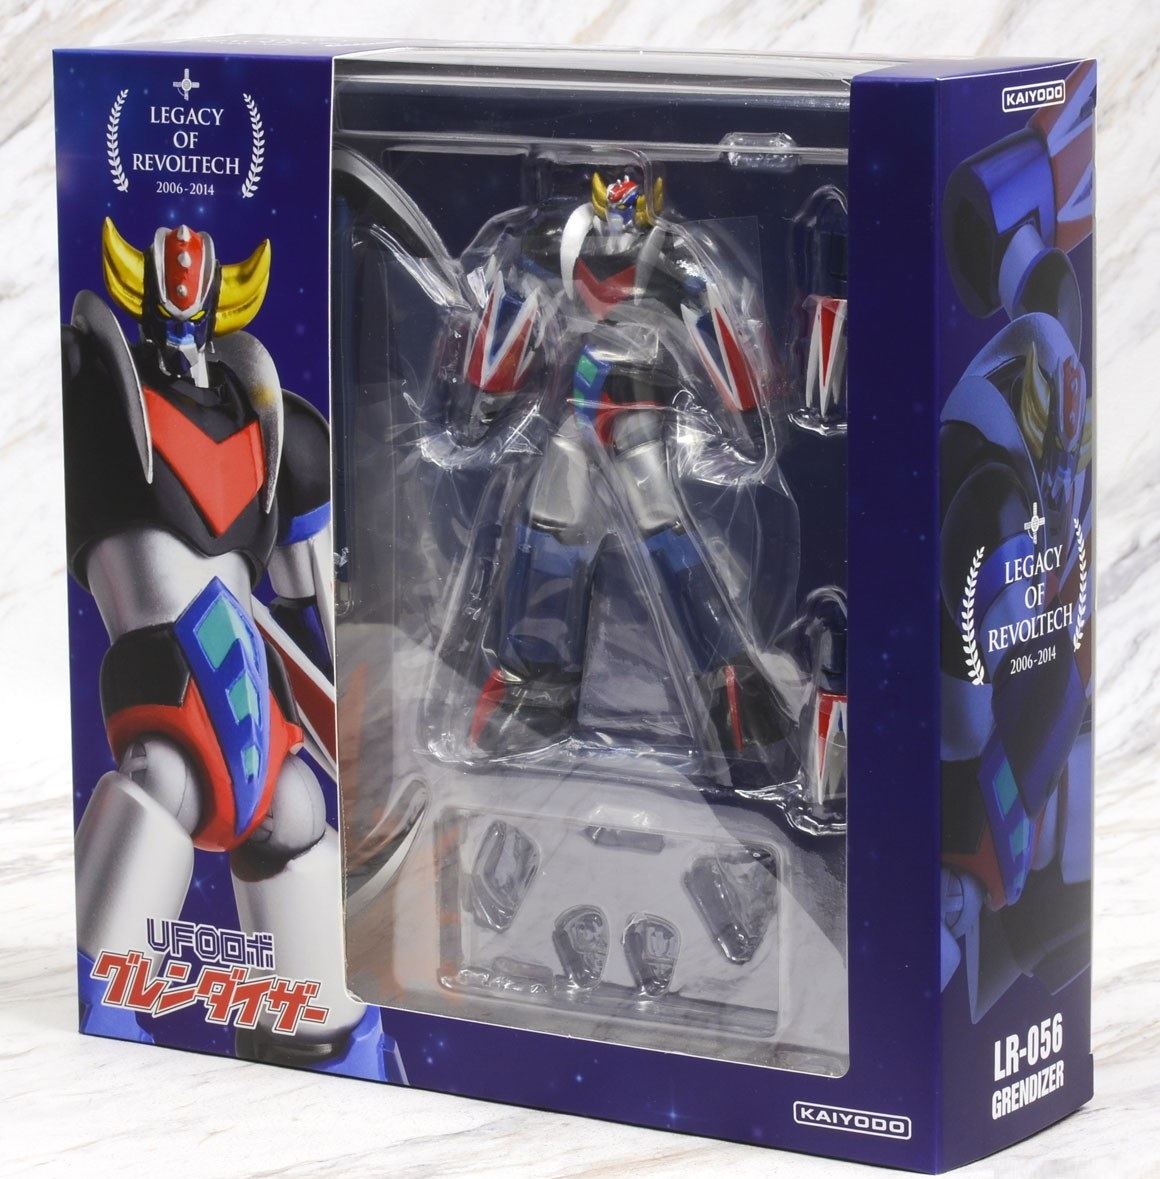 Kaiyodo Legacy of Figure Lr-056 Revoltech Grendizer About 130mm for sale online 